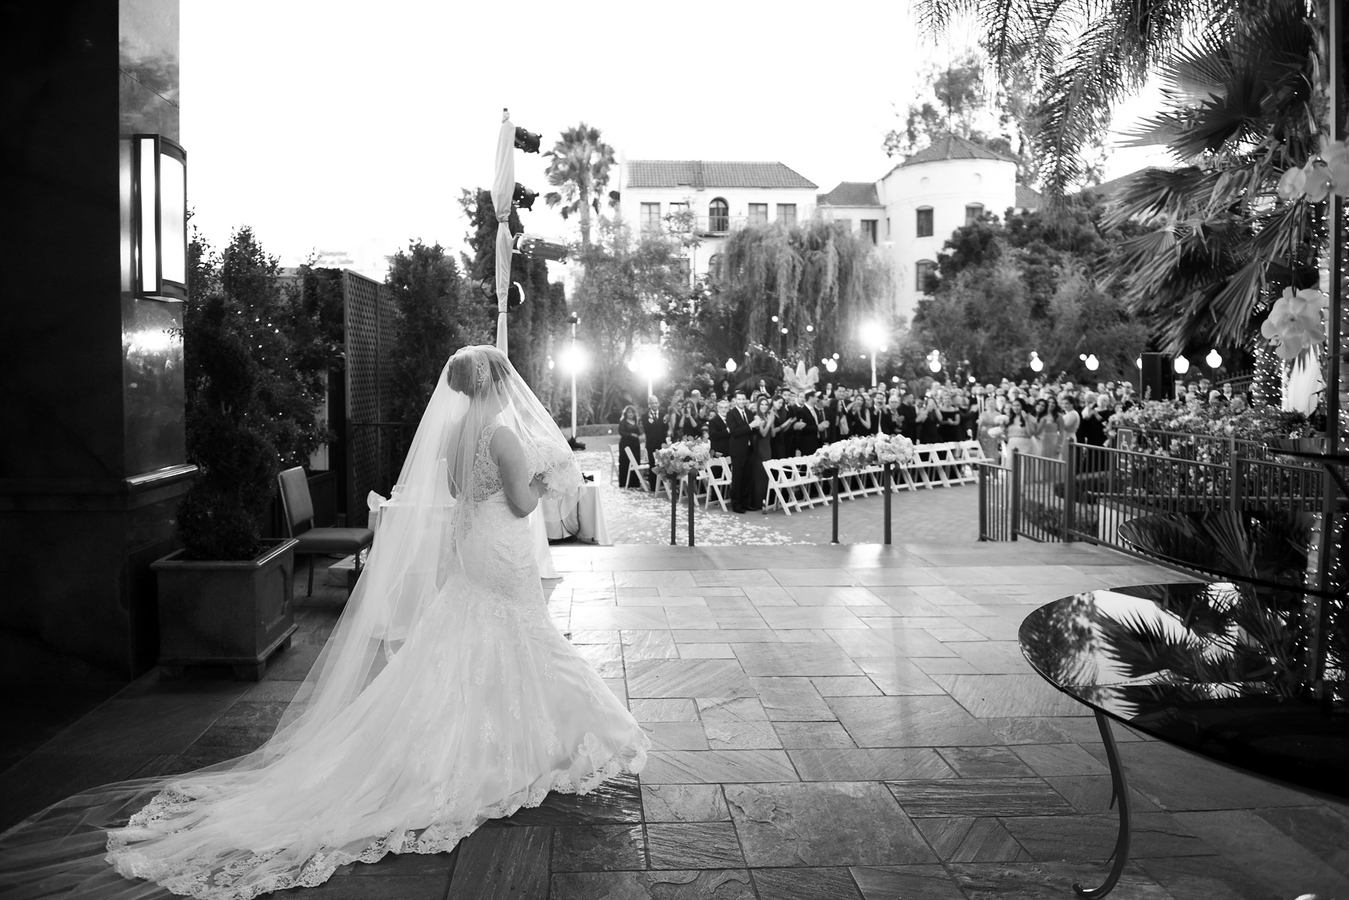 PLANNING YOUR DREAM WEDDING | TAGLYAN CULTURAL COMPLEX IN LOS ANGELES ...